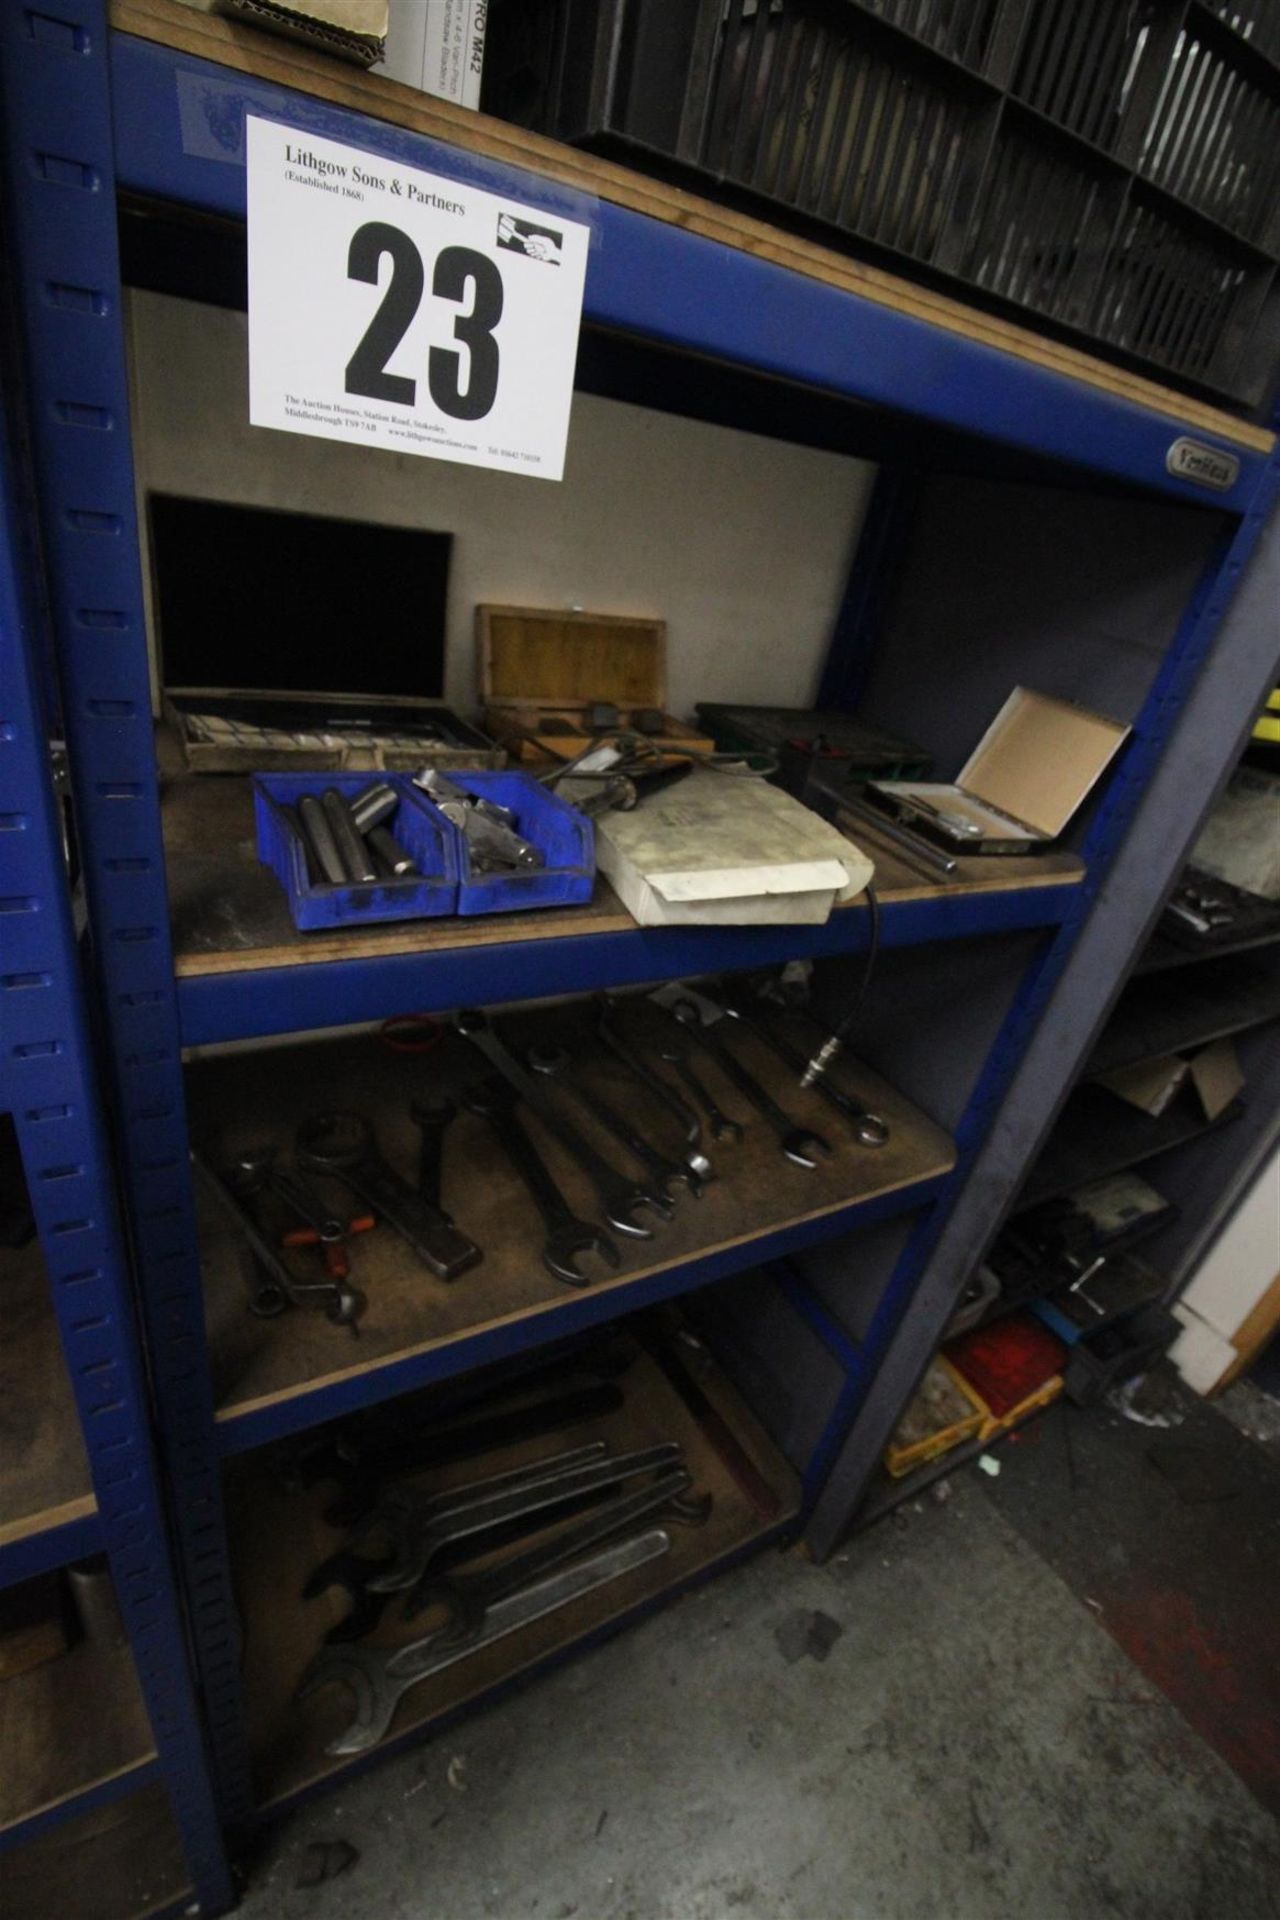 Blue, 6' Tall, 4-Shelf Rack, and Contents including Micrometers, Magnetic Stands, Feeler Gauges,